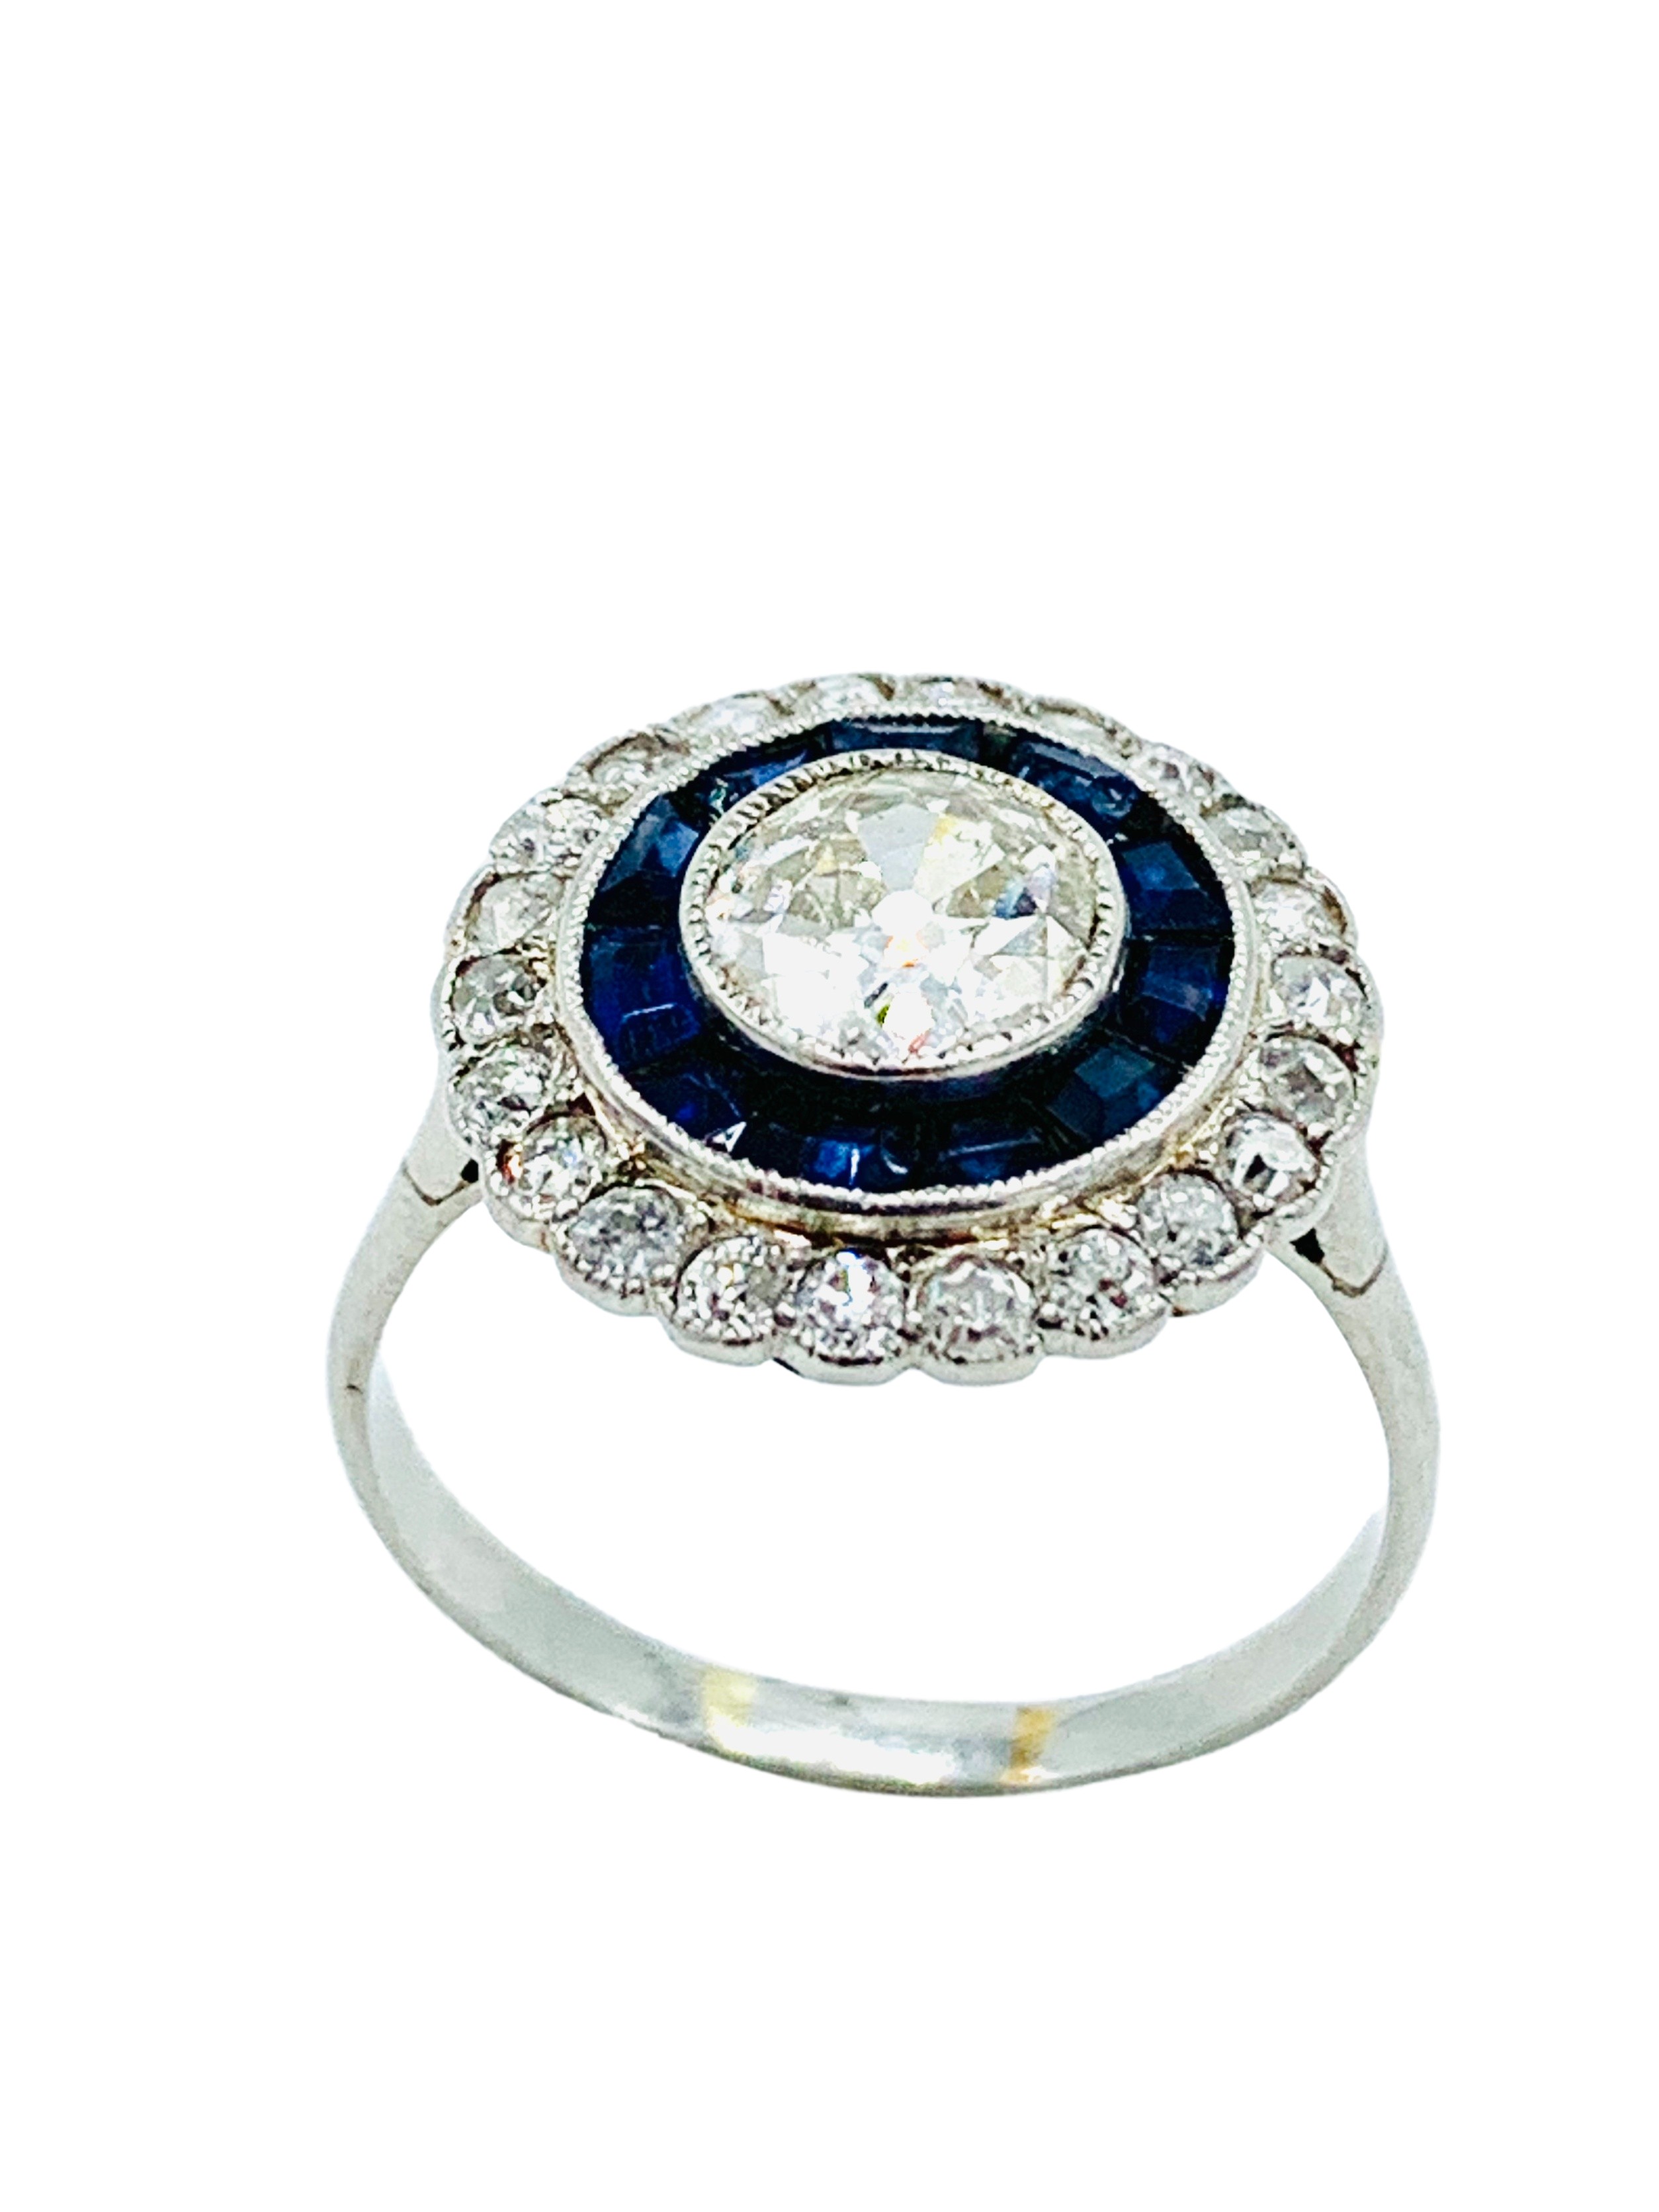 White gold, sapphire and diamond two row target ring.